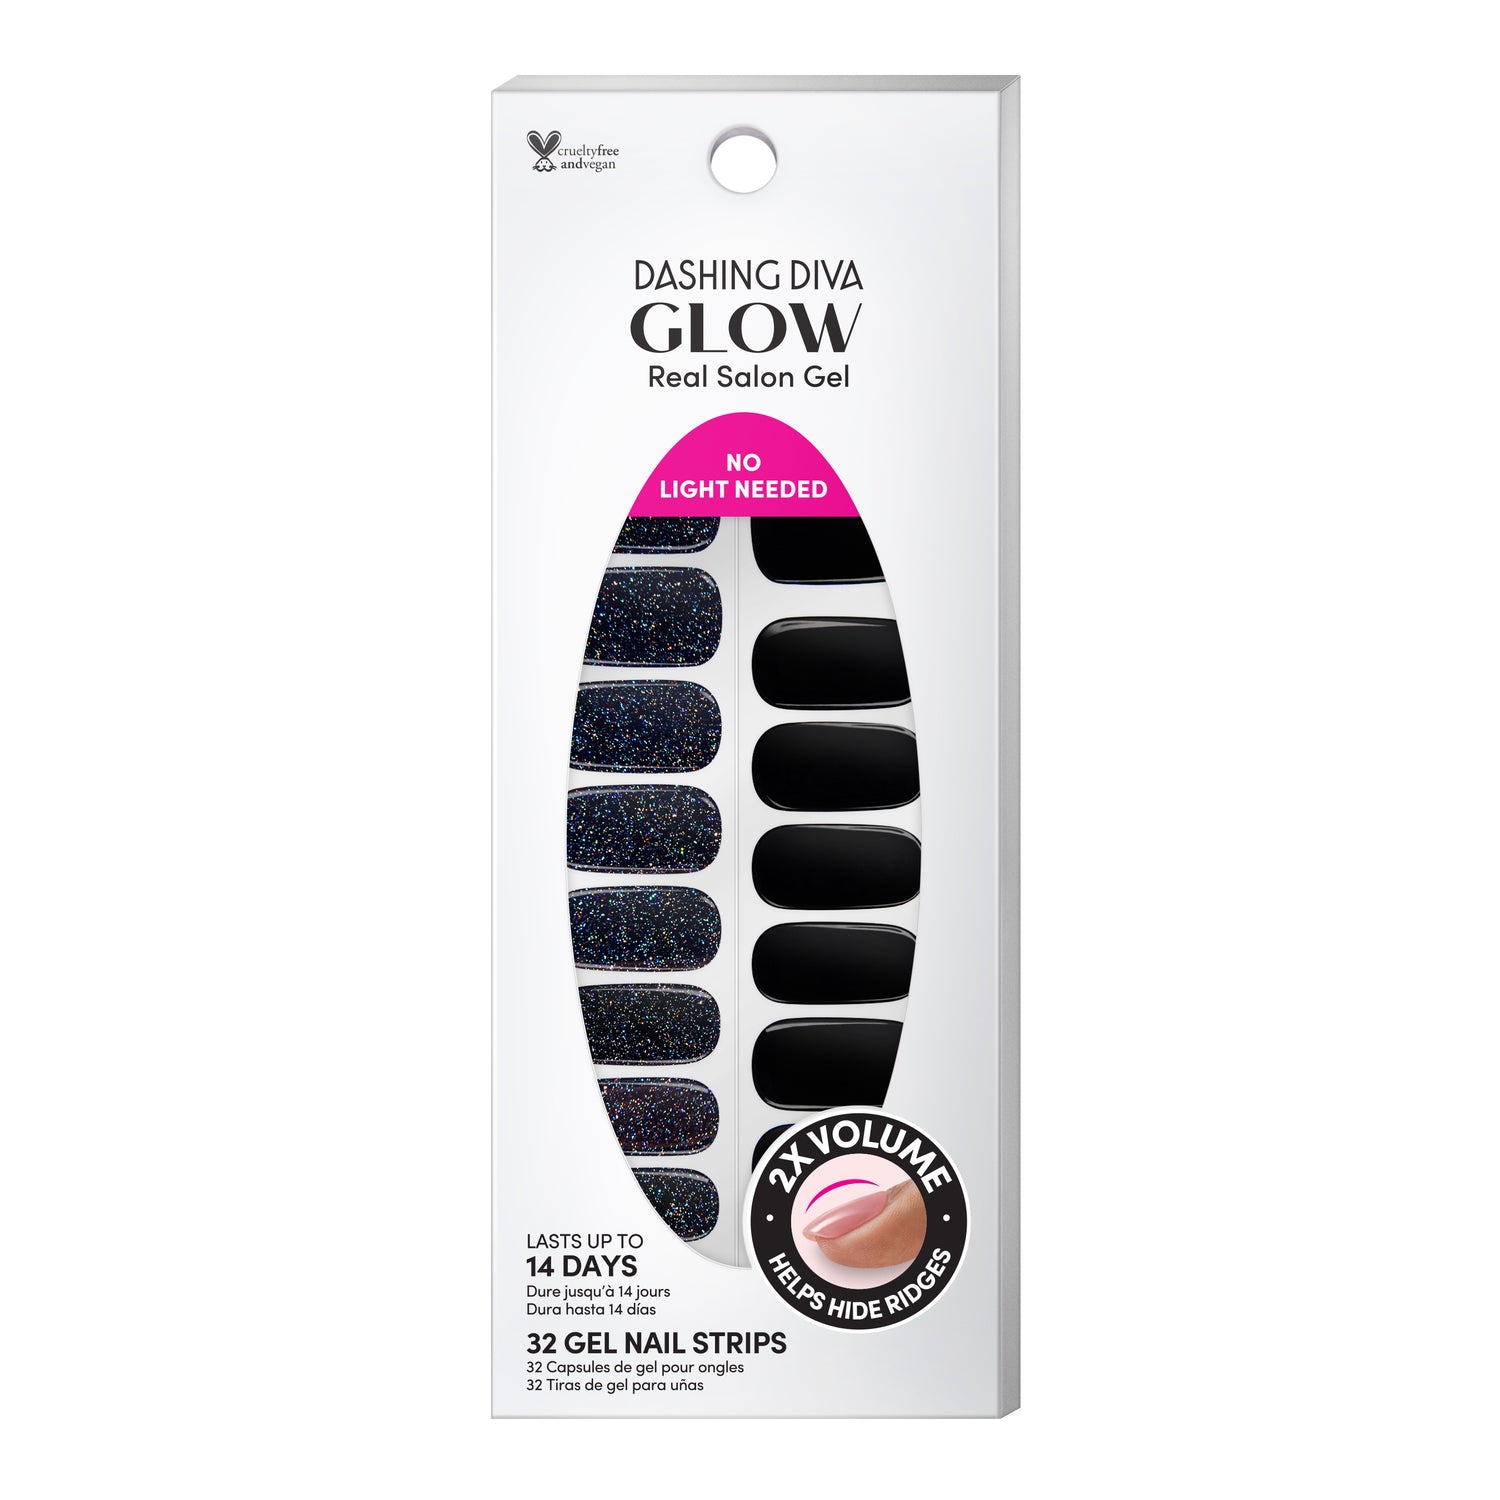 Glittered black gel nail strips with a double gel formula for an ultra-smooth finish.